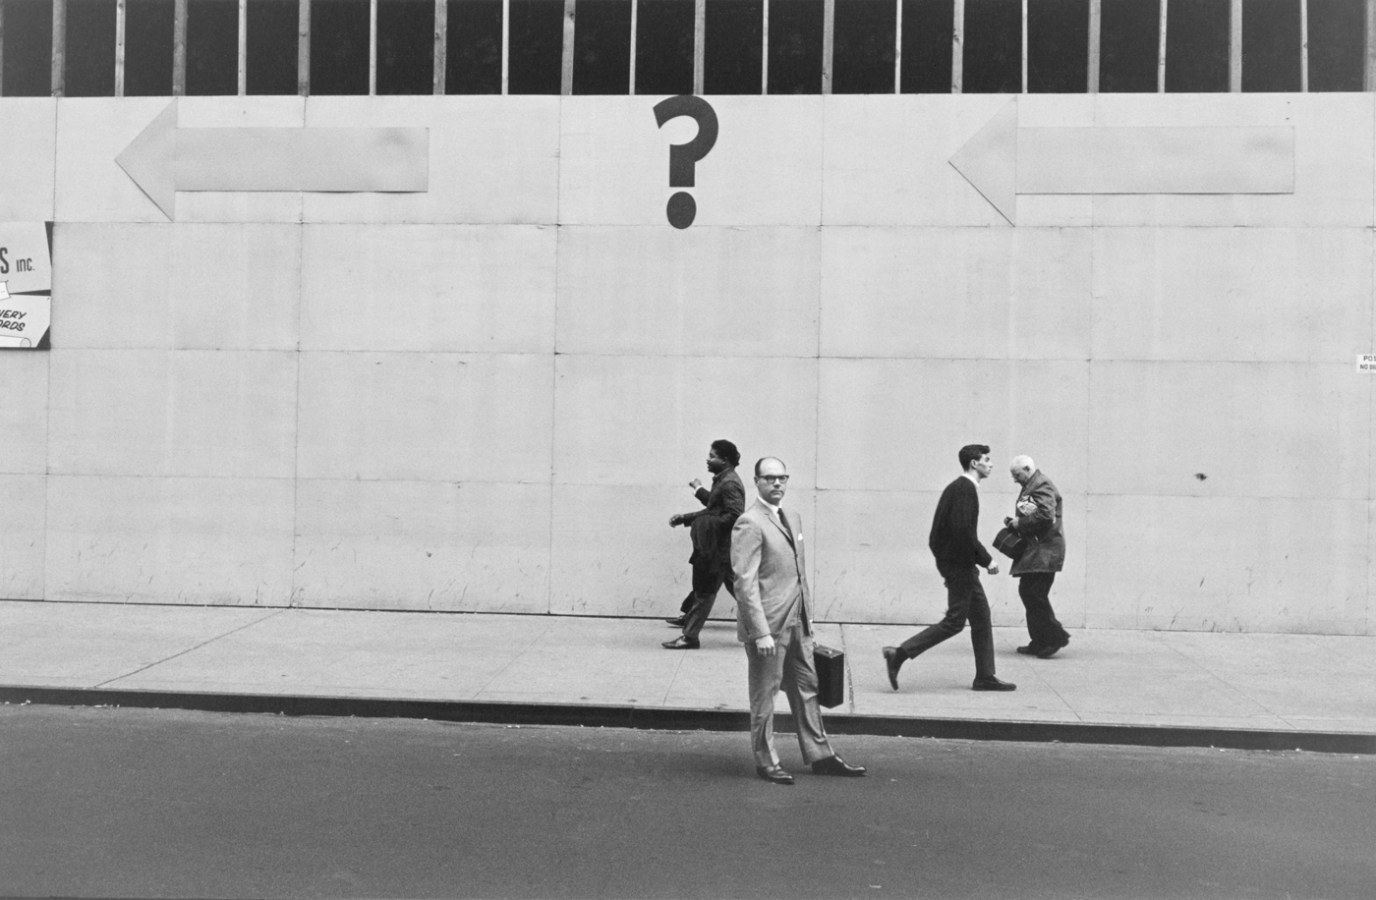 Black-and-white photograph of a man in a suit standing in the street in front of a. building with a question mark painted on it